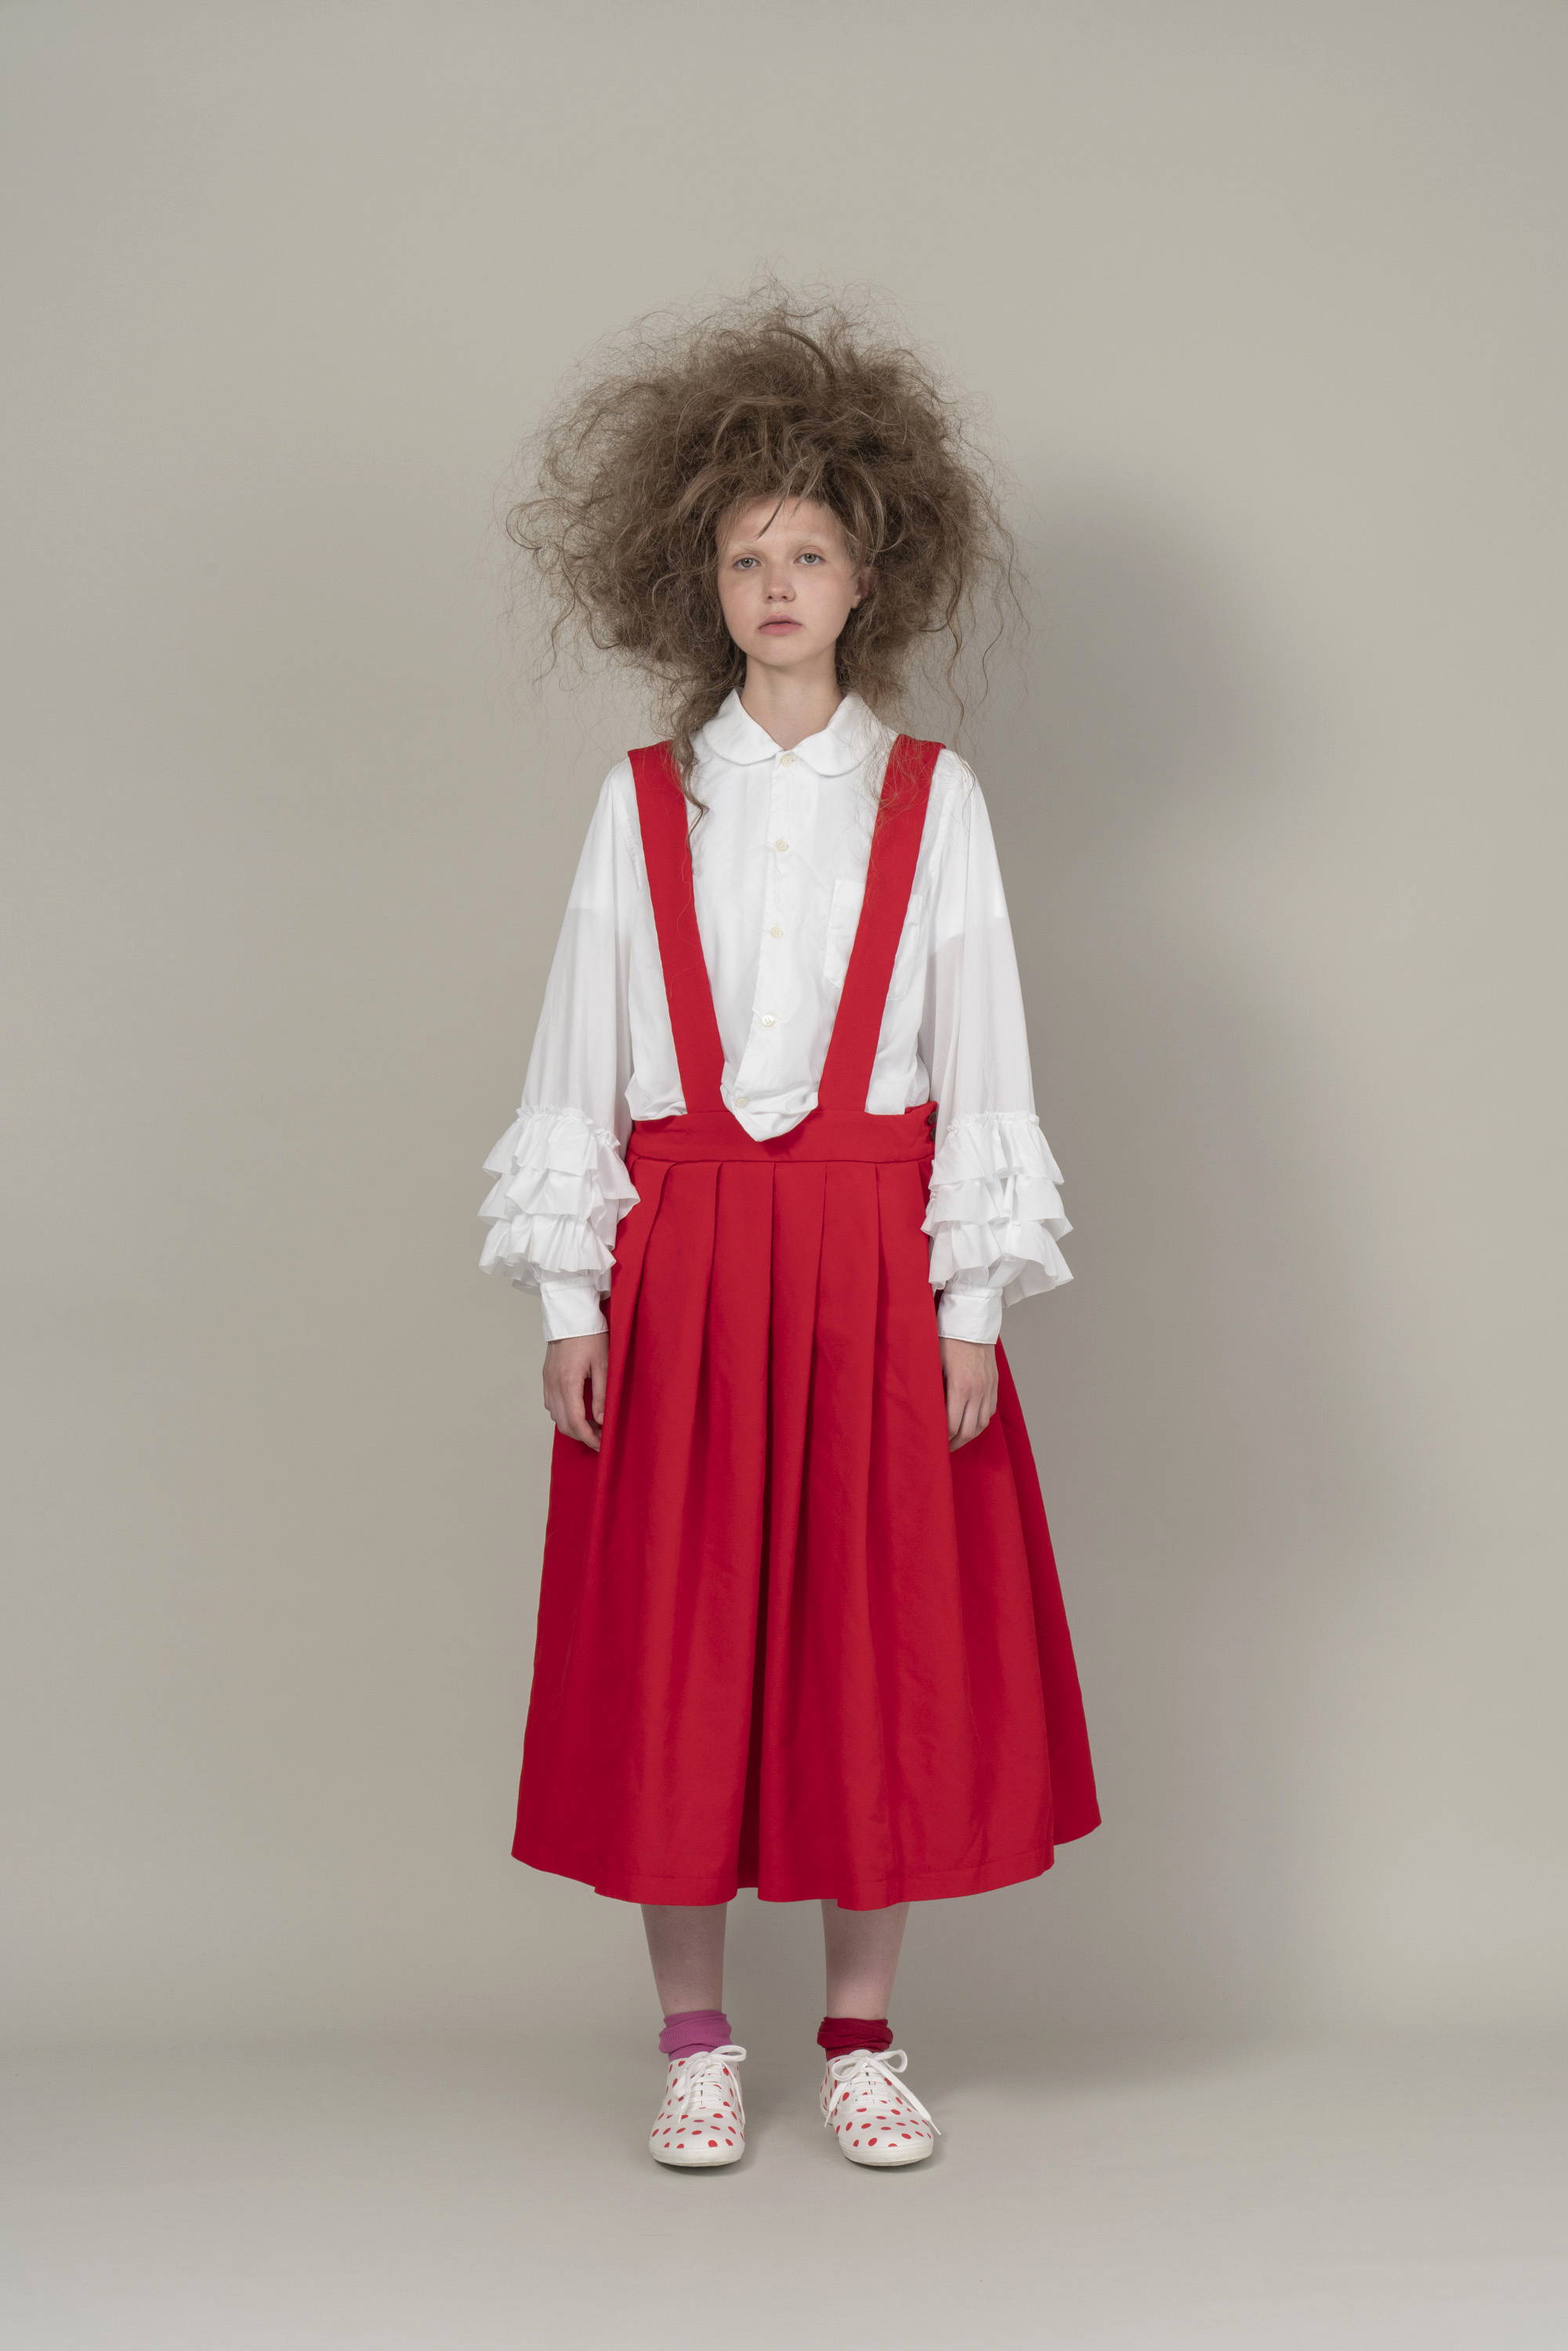 Founded in 2015, Comme des Garçons GIRL is a womenswear diffusion line ...